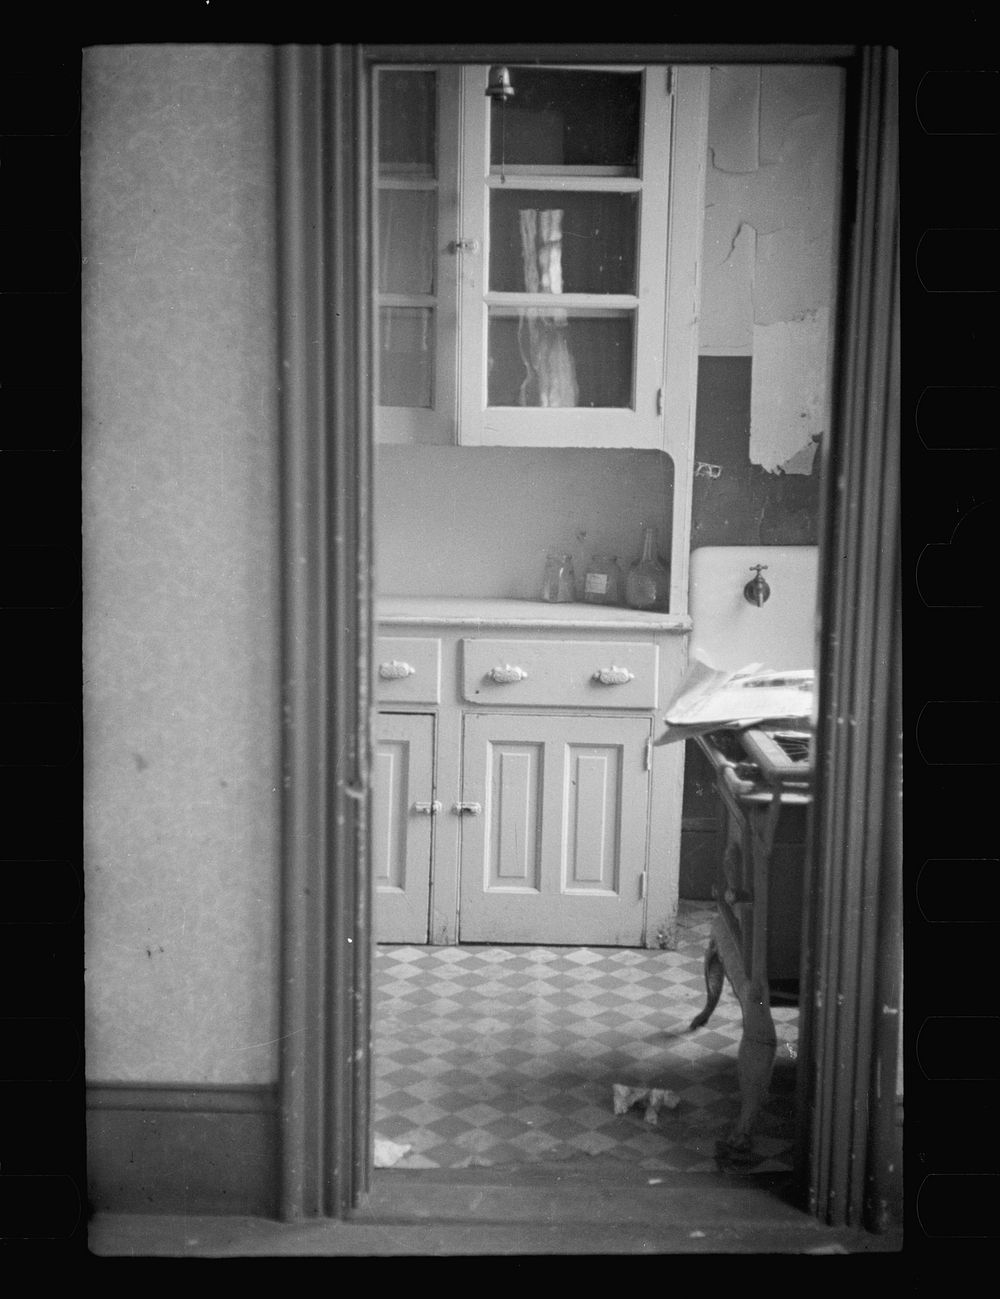 [Untitled photo, possibly related to: Kitchen of an apartment available for rent in the District of Columbia]. Sourced from…